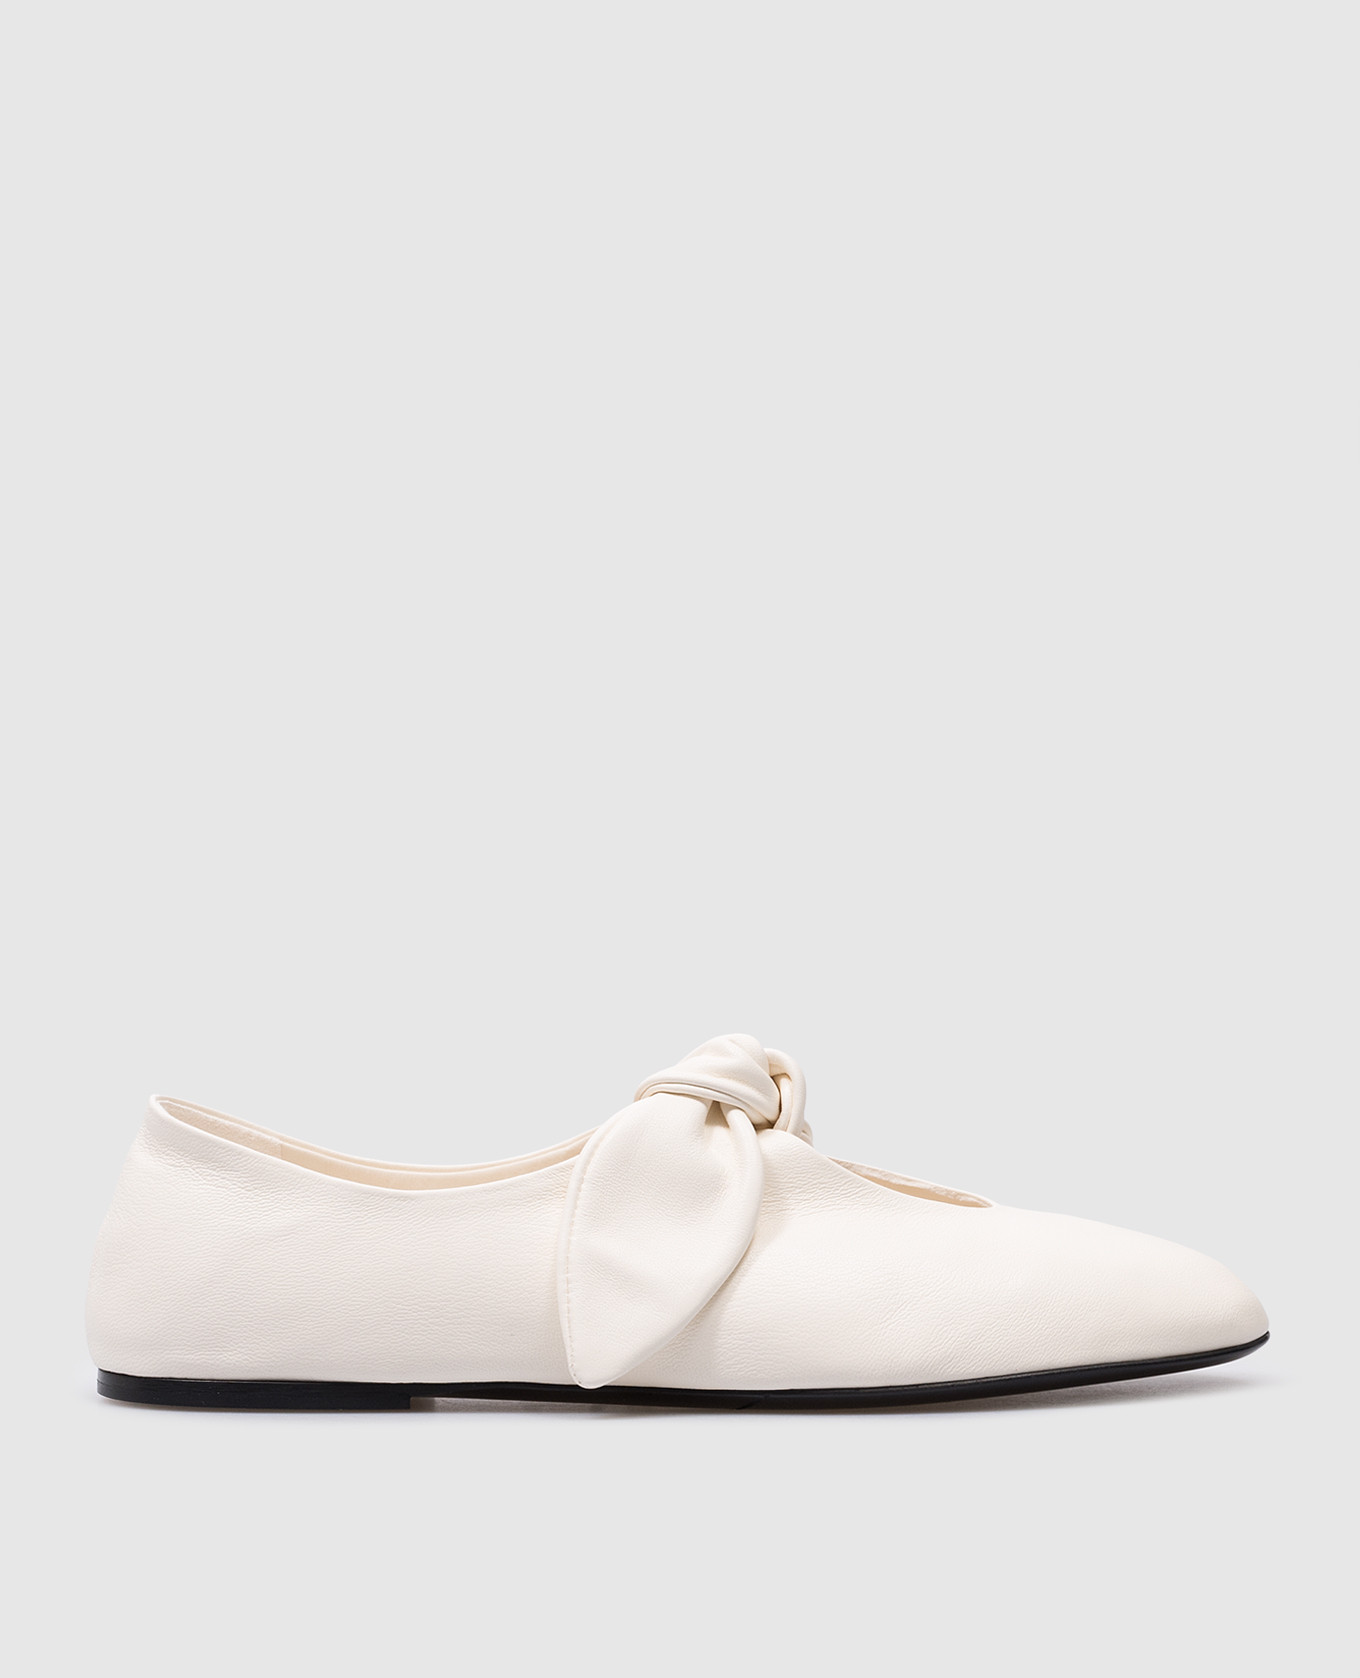 White leather ballet flats with a bow